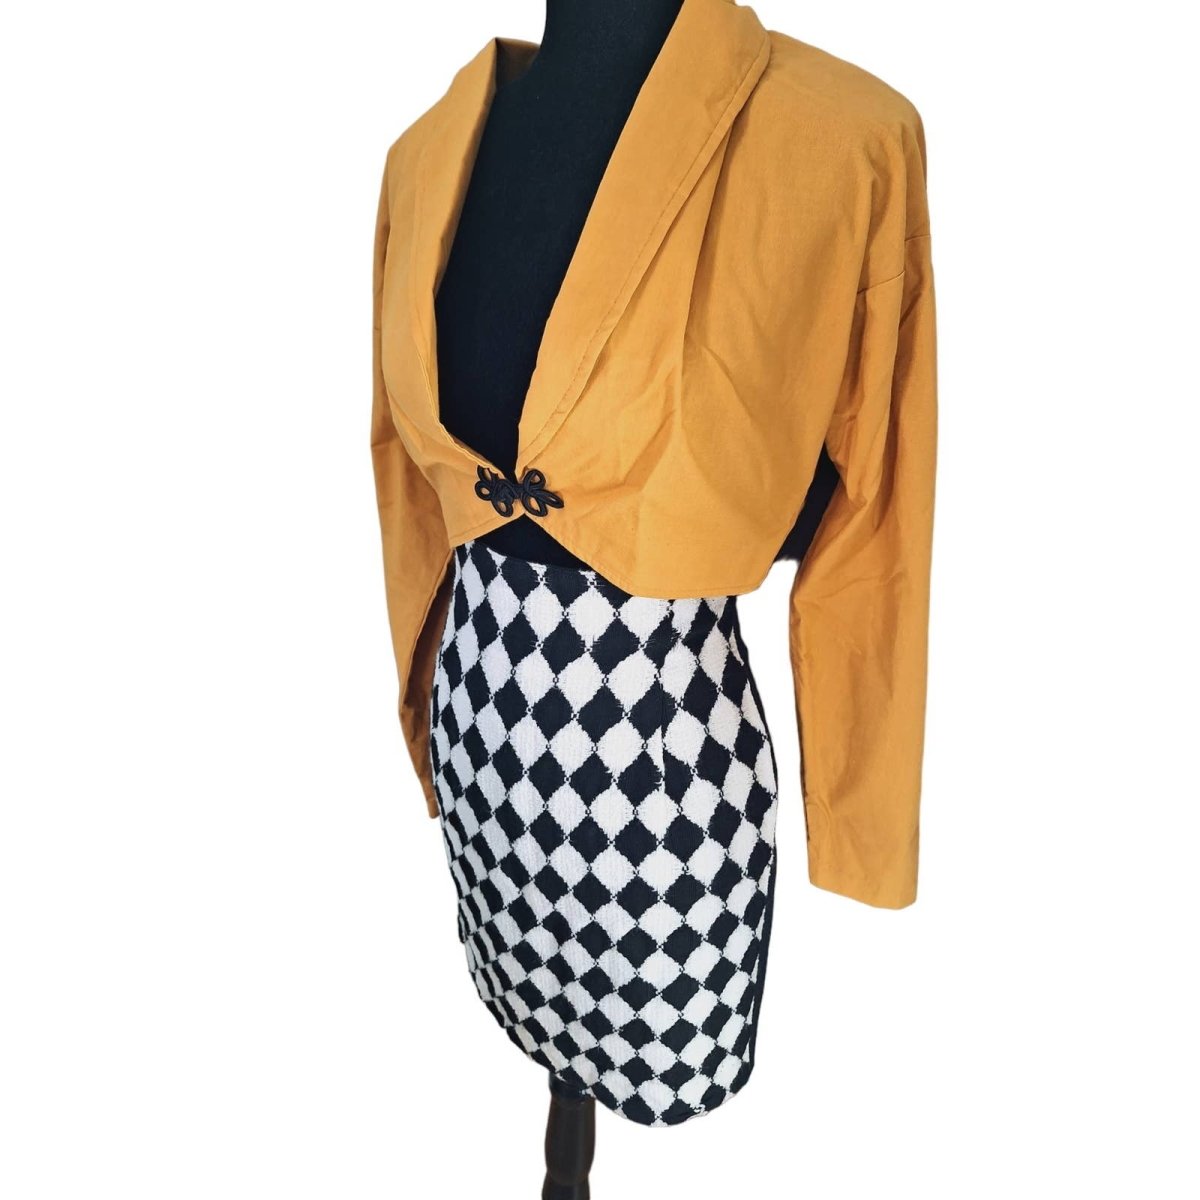 Vintage 80s/90s Harlequin Mini Skirt Size 4 Waist 26" - themallvintage The Mall Vintage 1980s 1990s Fall Capsule